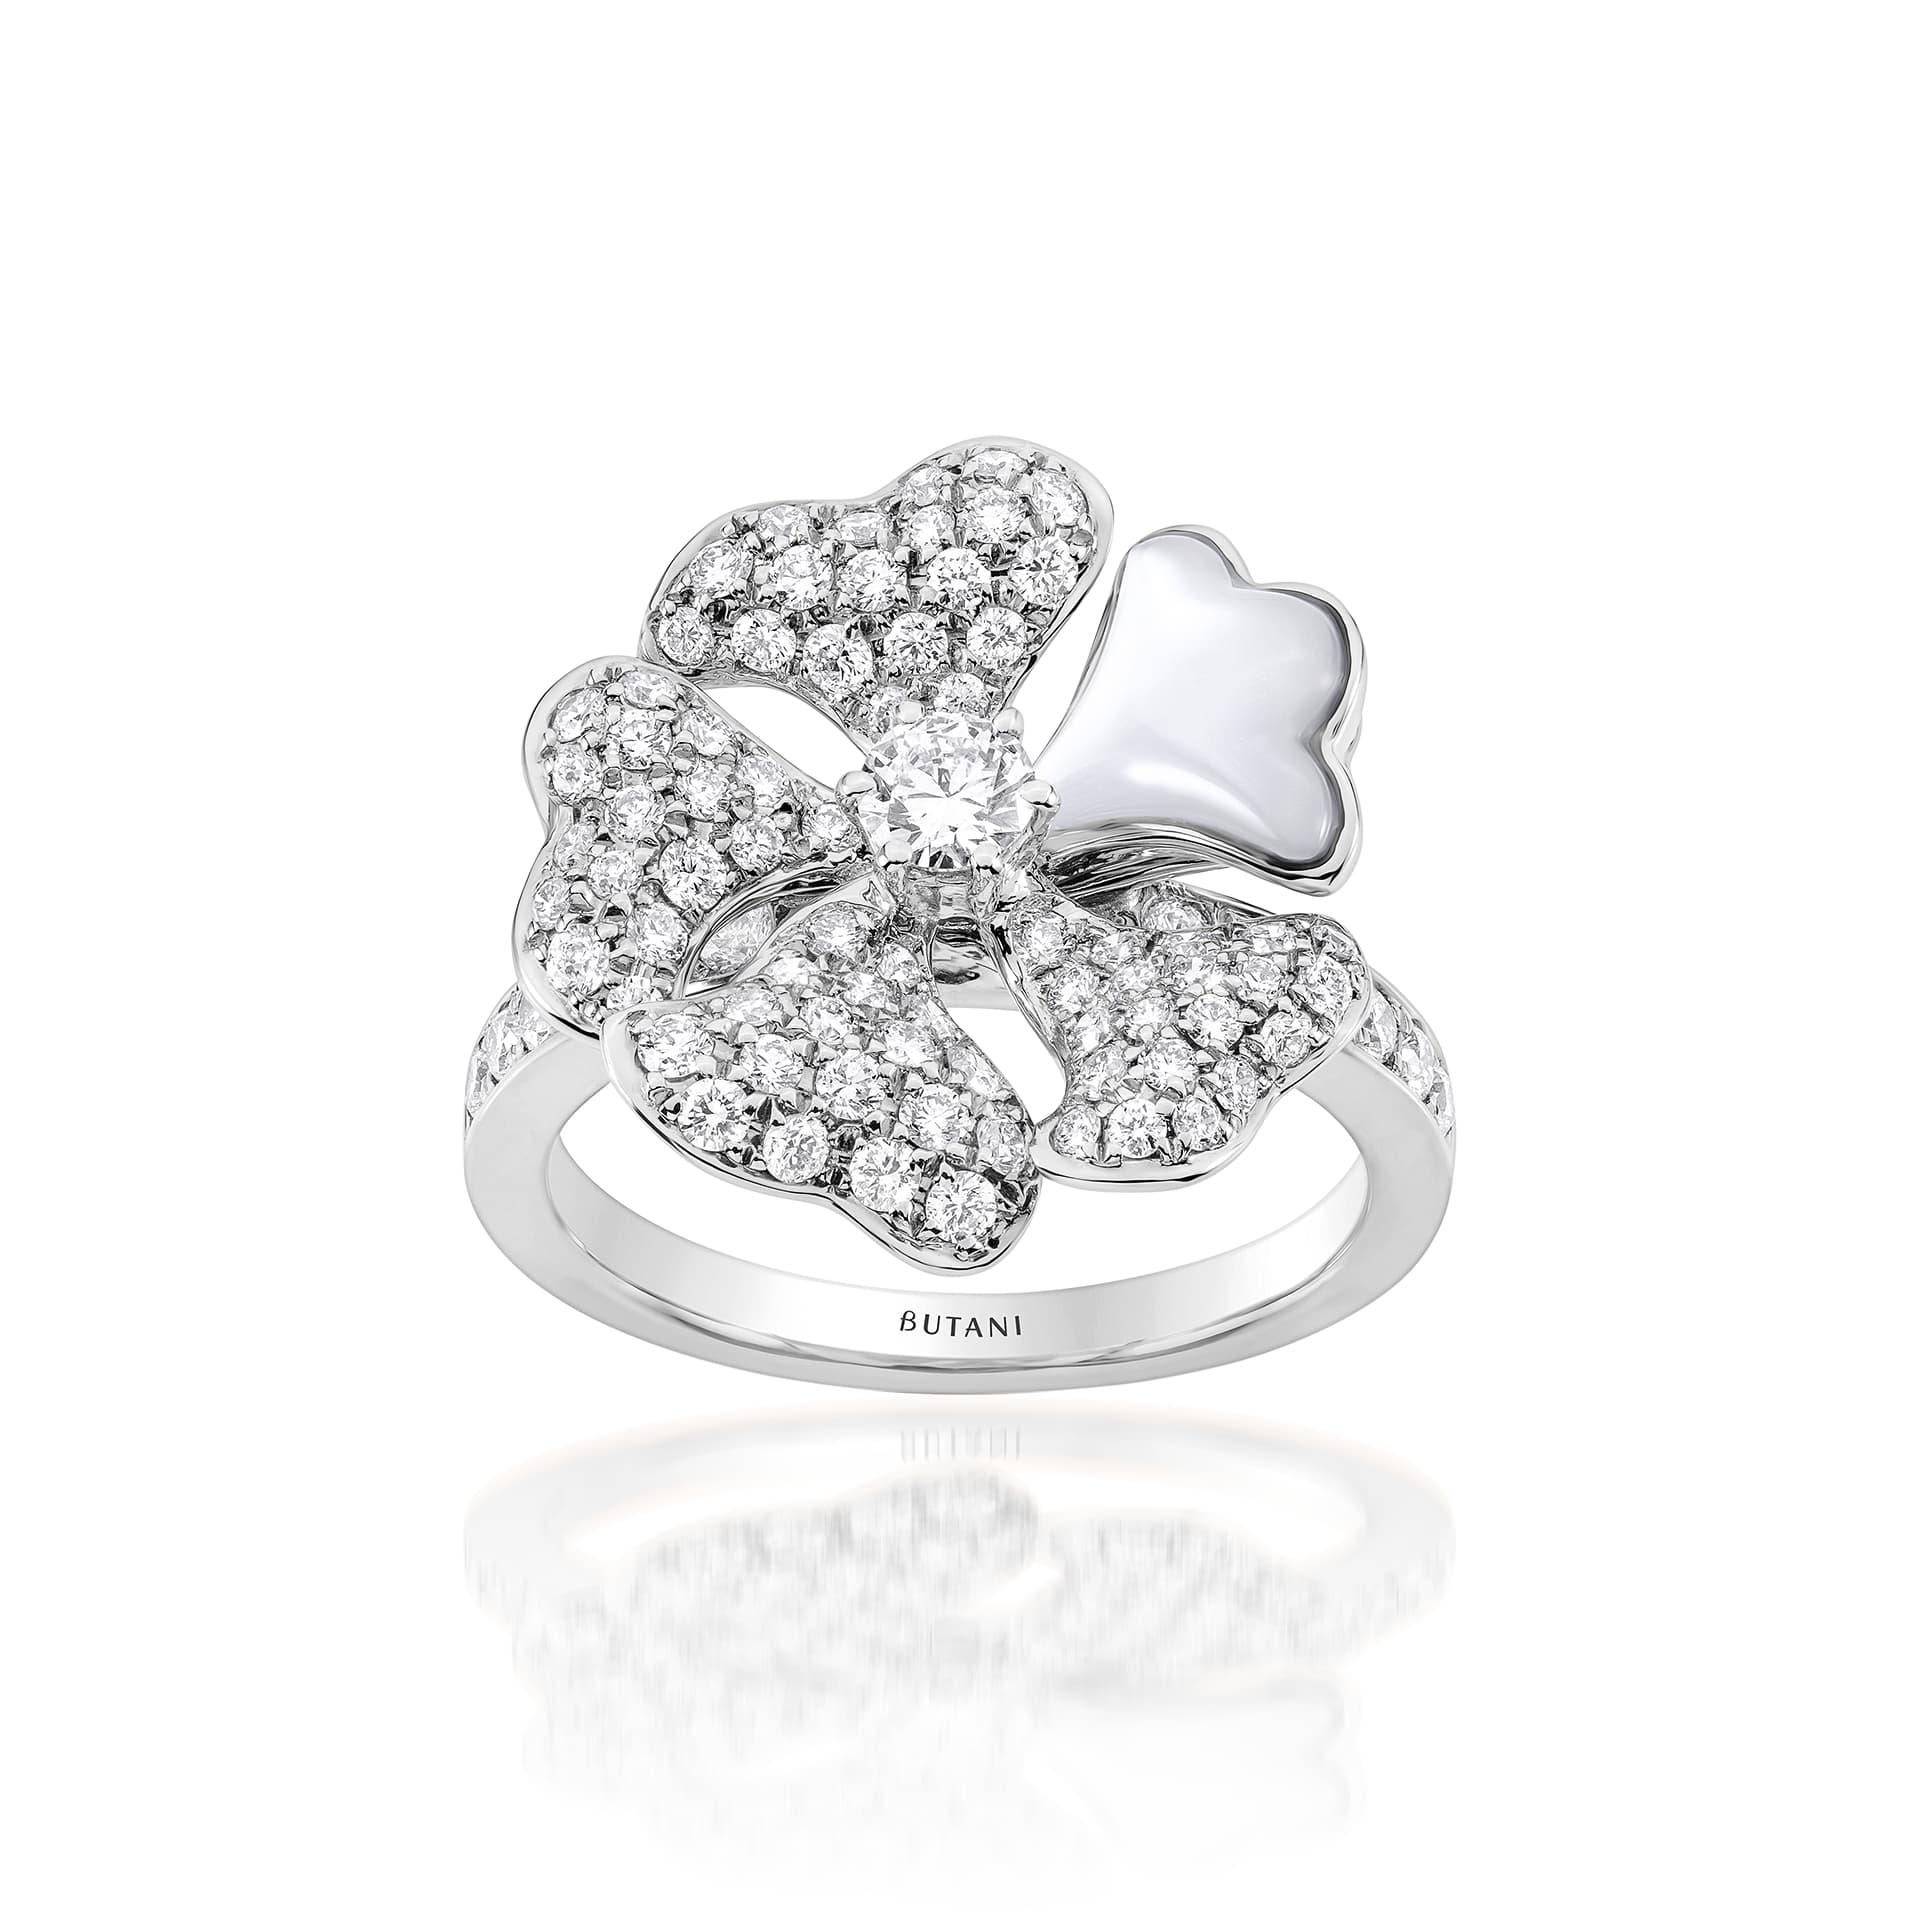 Bloom Mother-of-Pearl and Pavé Diamond Ring in 18K White Gold

Inspired by the exquisite petals of the alpine cinquefoil flower, the Bloom collection combines the richness of diamonds and precious metals with the light versatility of this delicate,